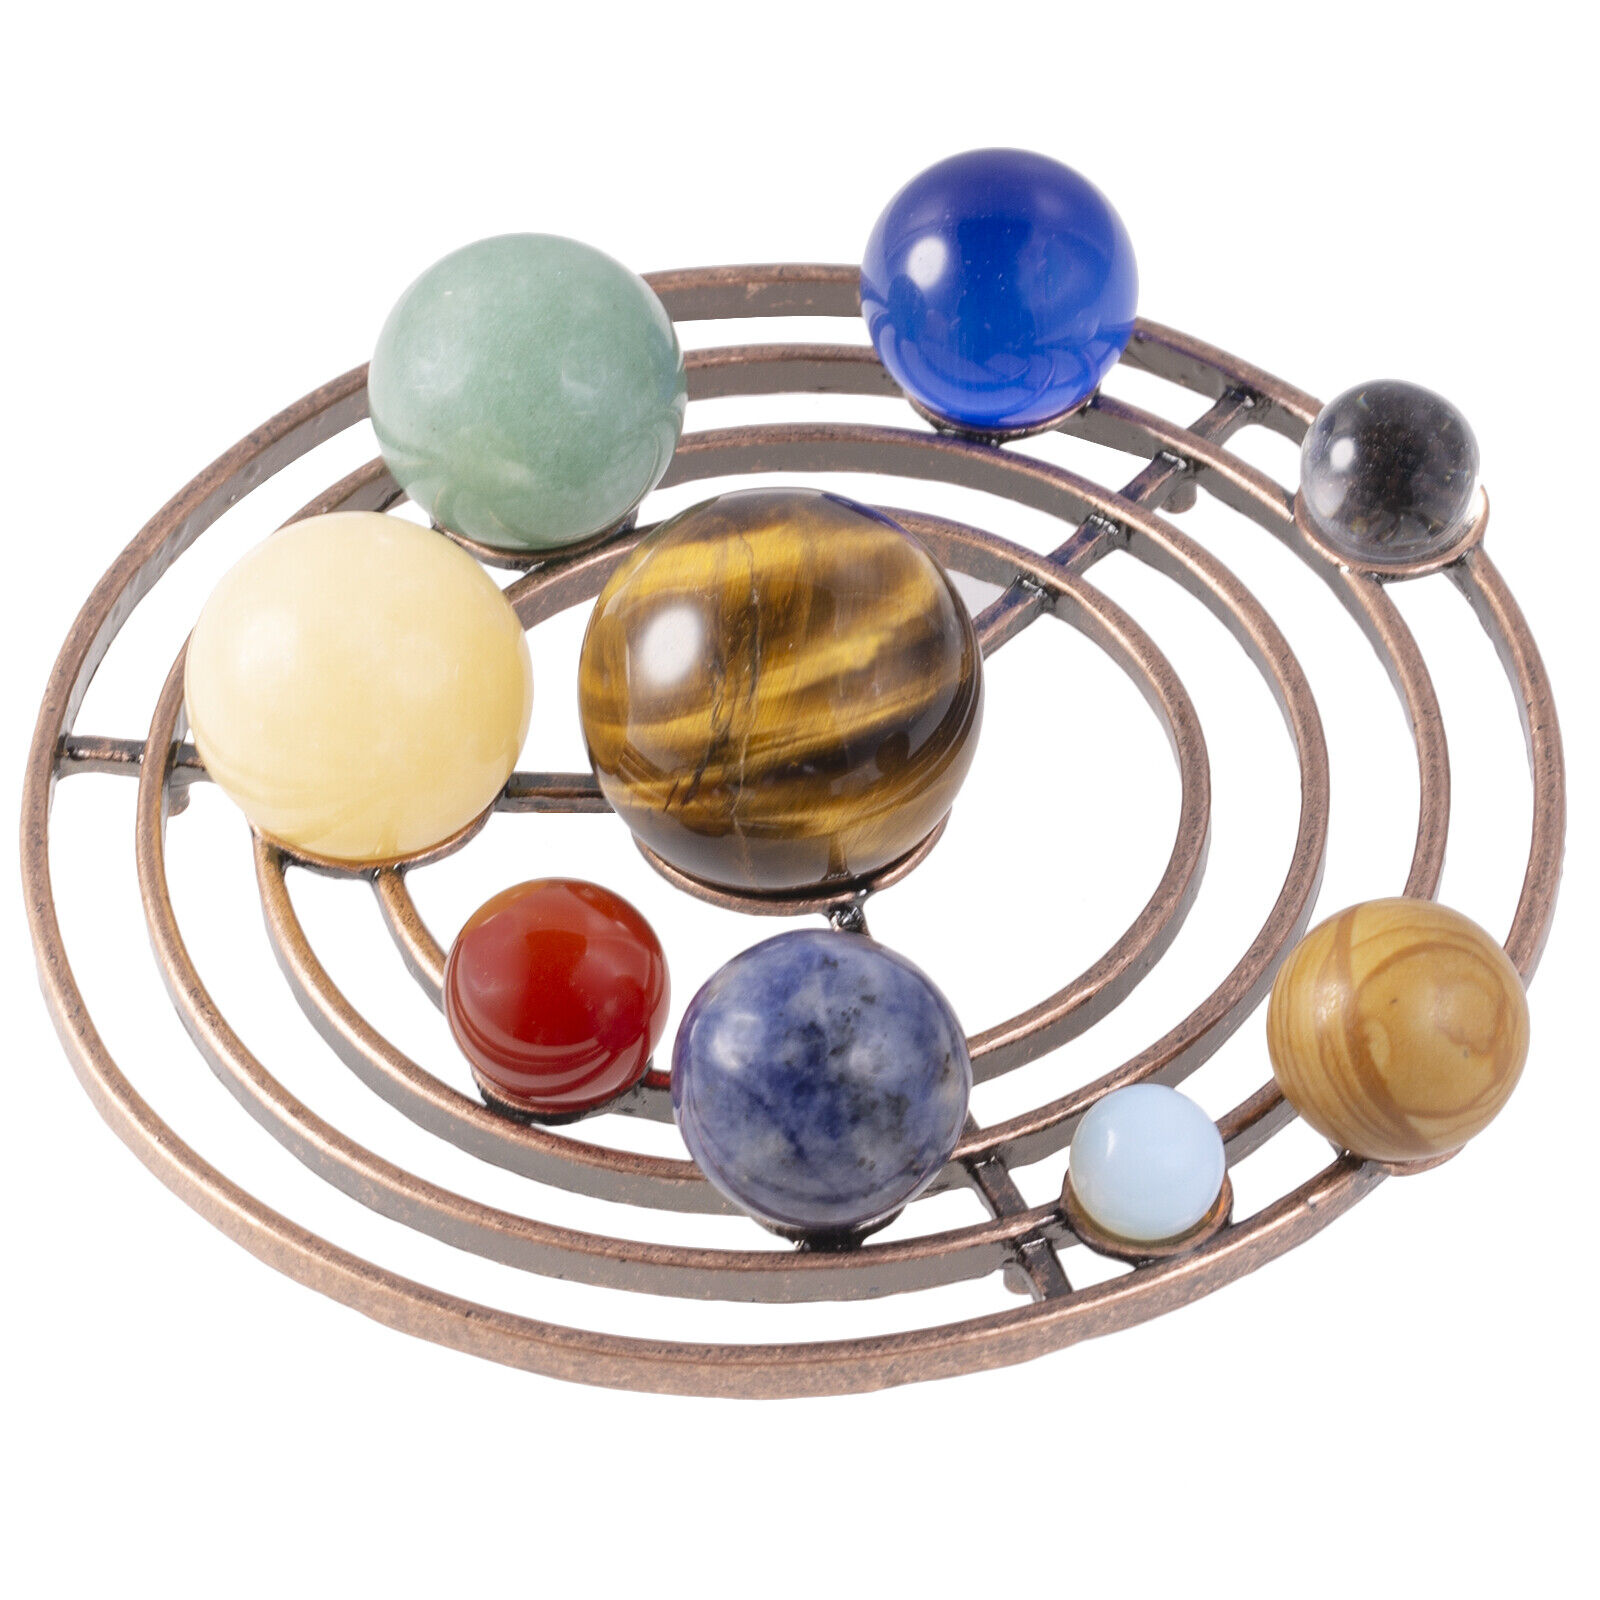 Solar System 9 Planets Crystal Ball Set With Metal Display Stand For Home Decor